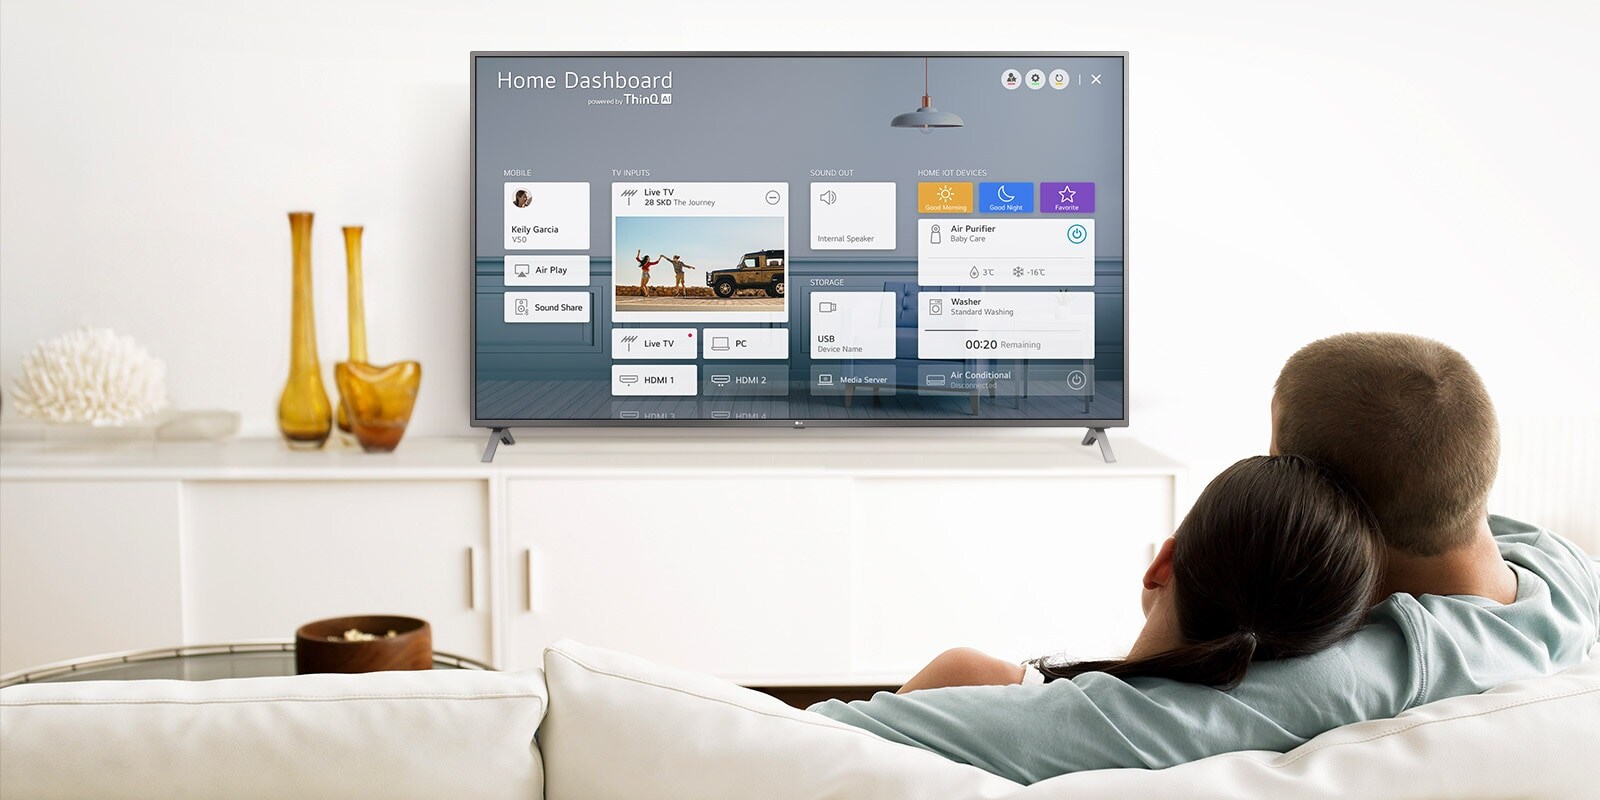 A men and women sitting on a sofa in the living room with the Home Dashboard on the TV screen